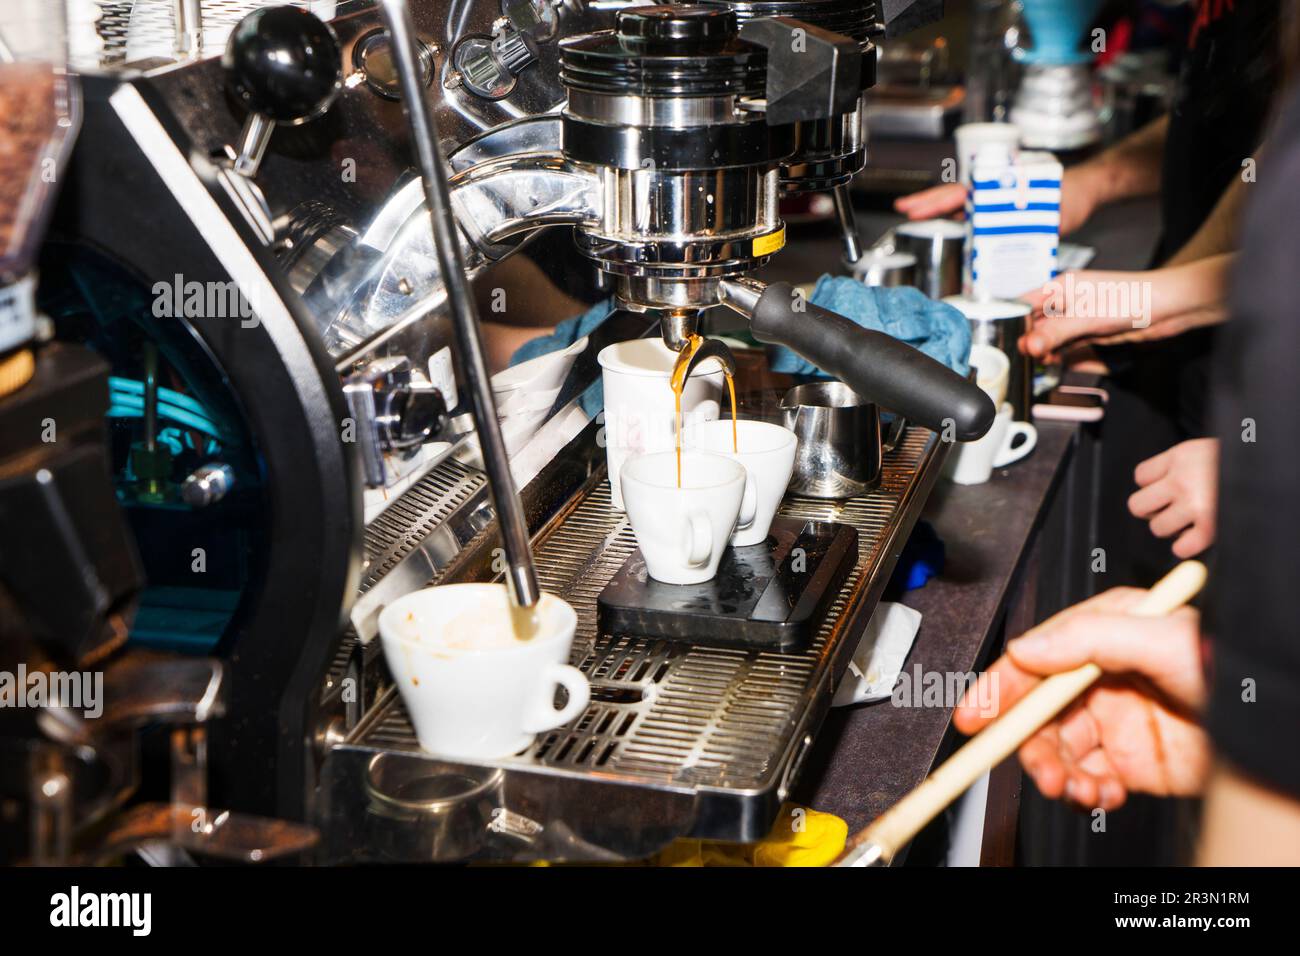 Young woman barista preparing coffee using machine in the cafe. Stock Photo